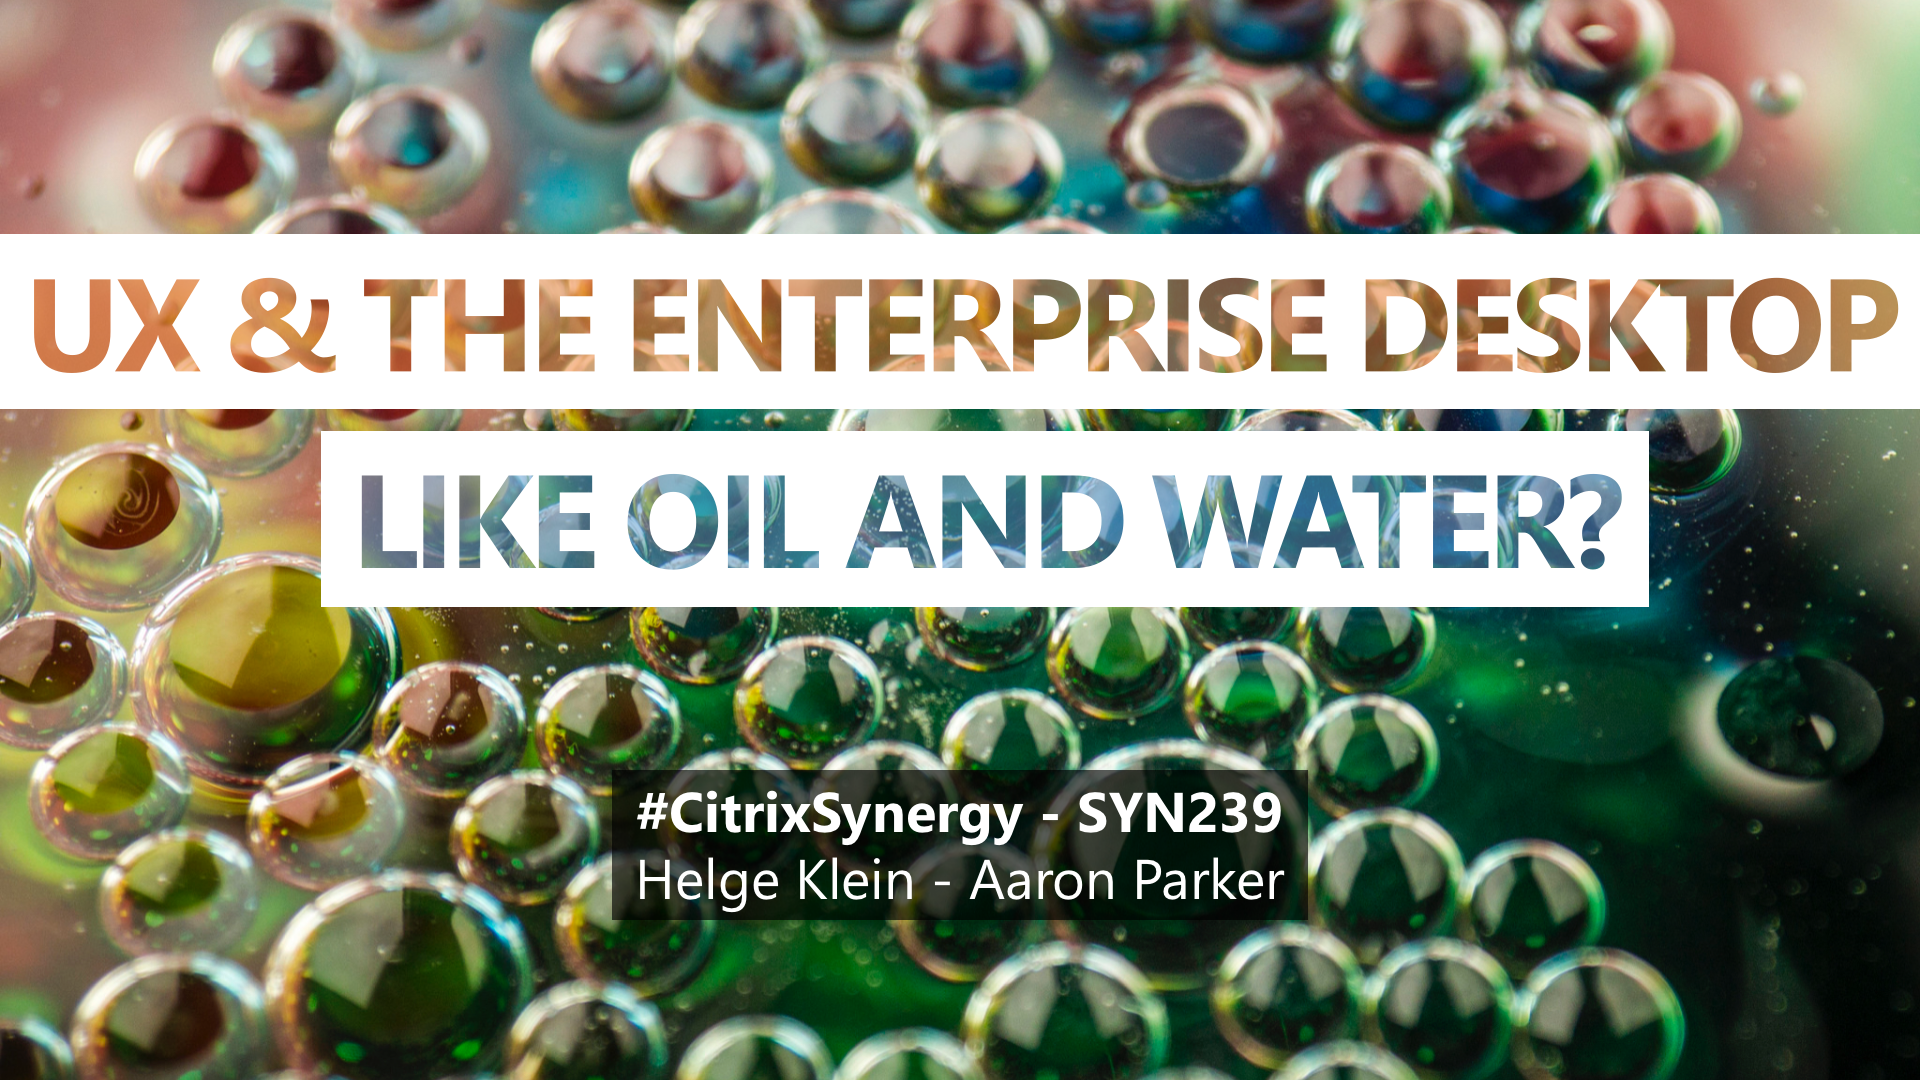 Citrix Synergy 2016: UX and the Enterprise Desktop like Oil and Water